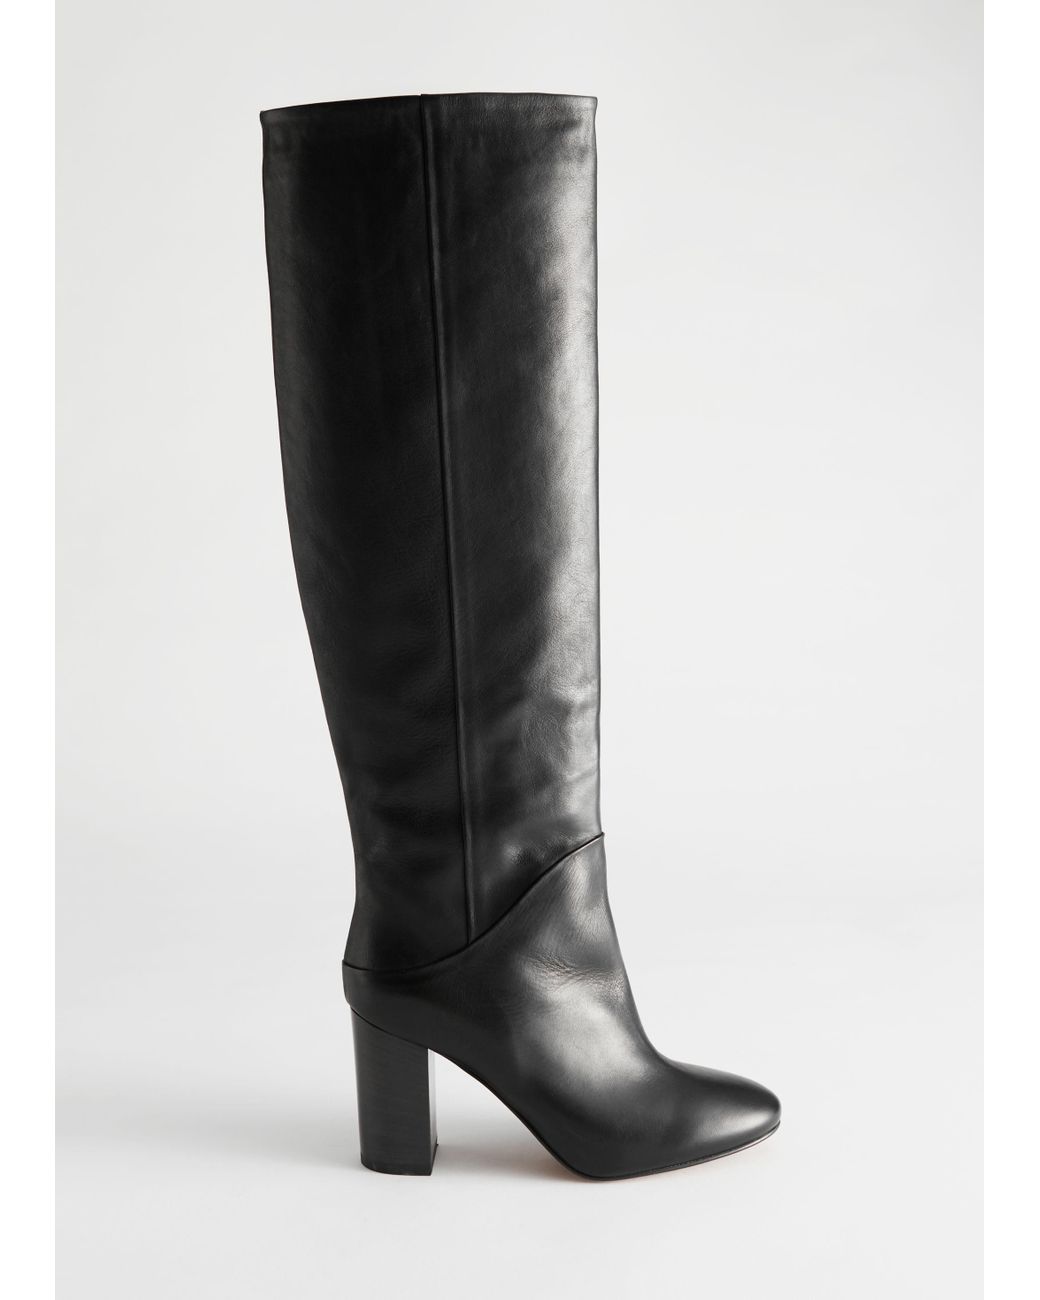 & Other Stories Chrome Free Tanned Leather Knee High Boots in Black | Lyst